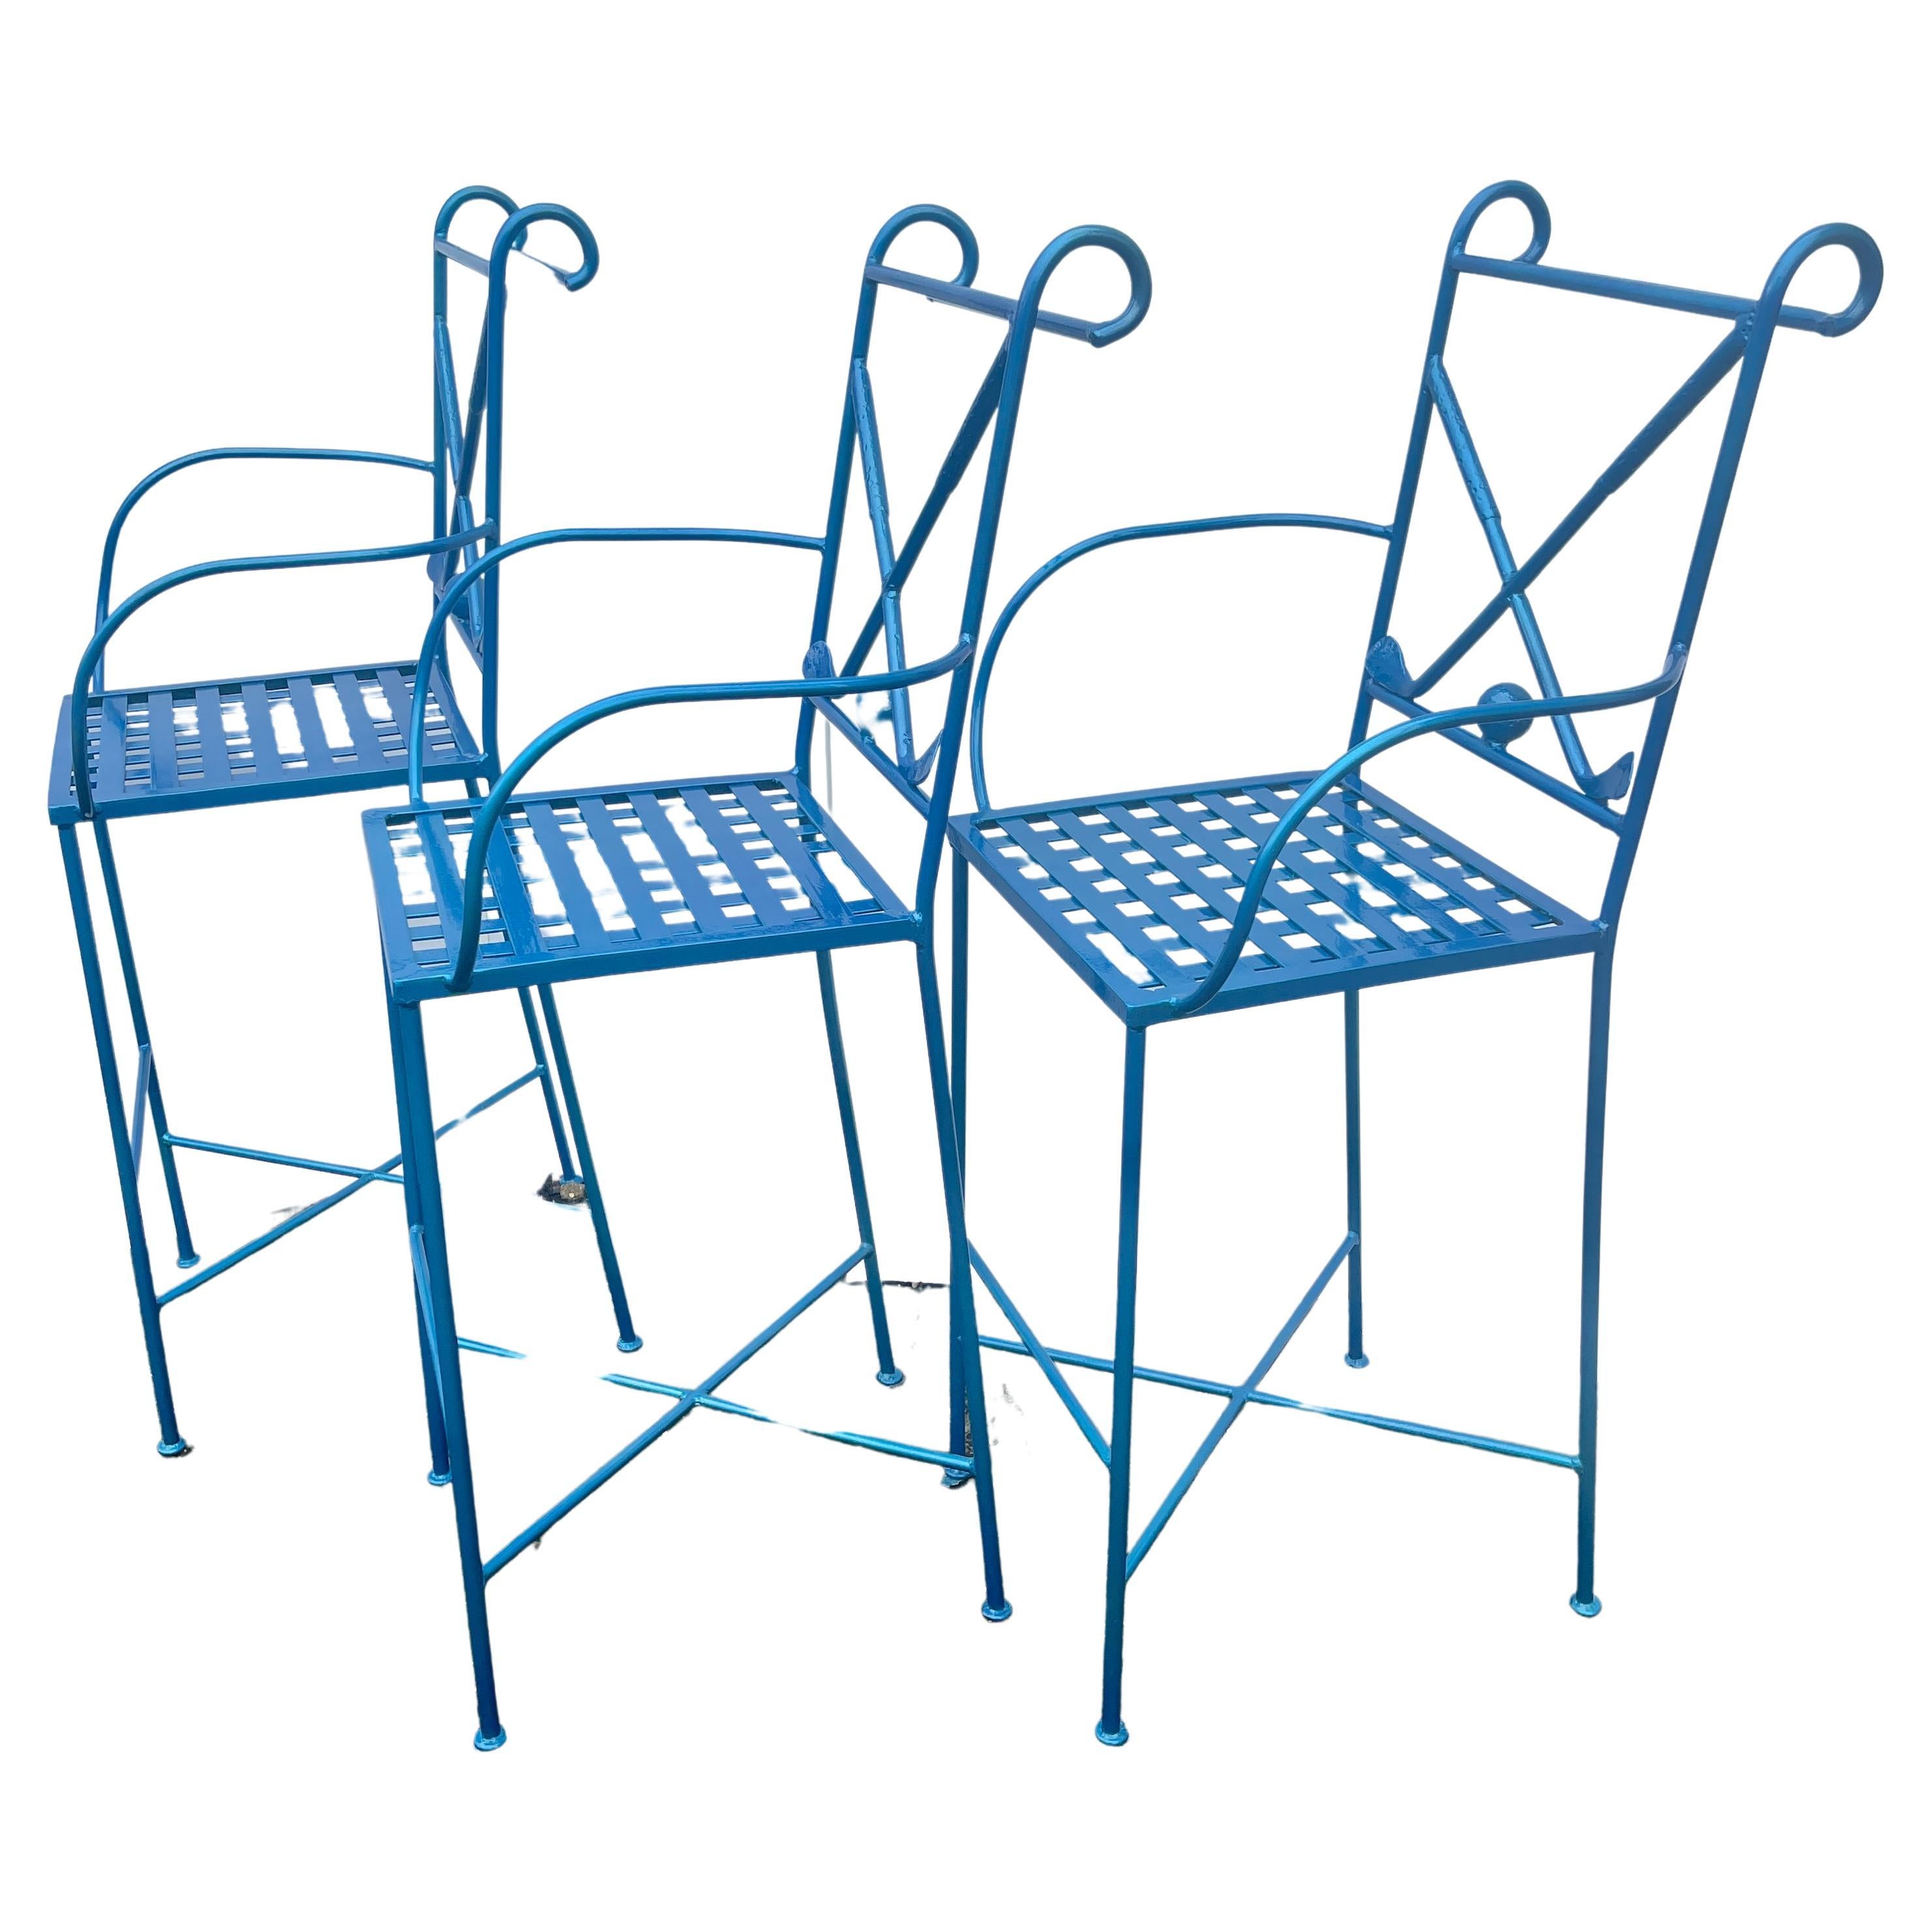 Modern set of metal bar stools, set of three. These exciting barstools with figure of golfer on the back rest has been newly powder coated in Maui Blue (bright metallic blue). The set of barstools are sturdy and exciting in a modern decor. The seat